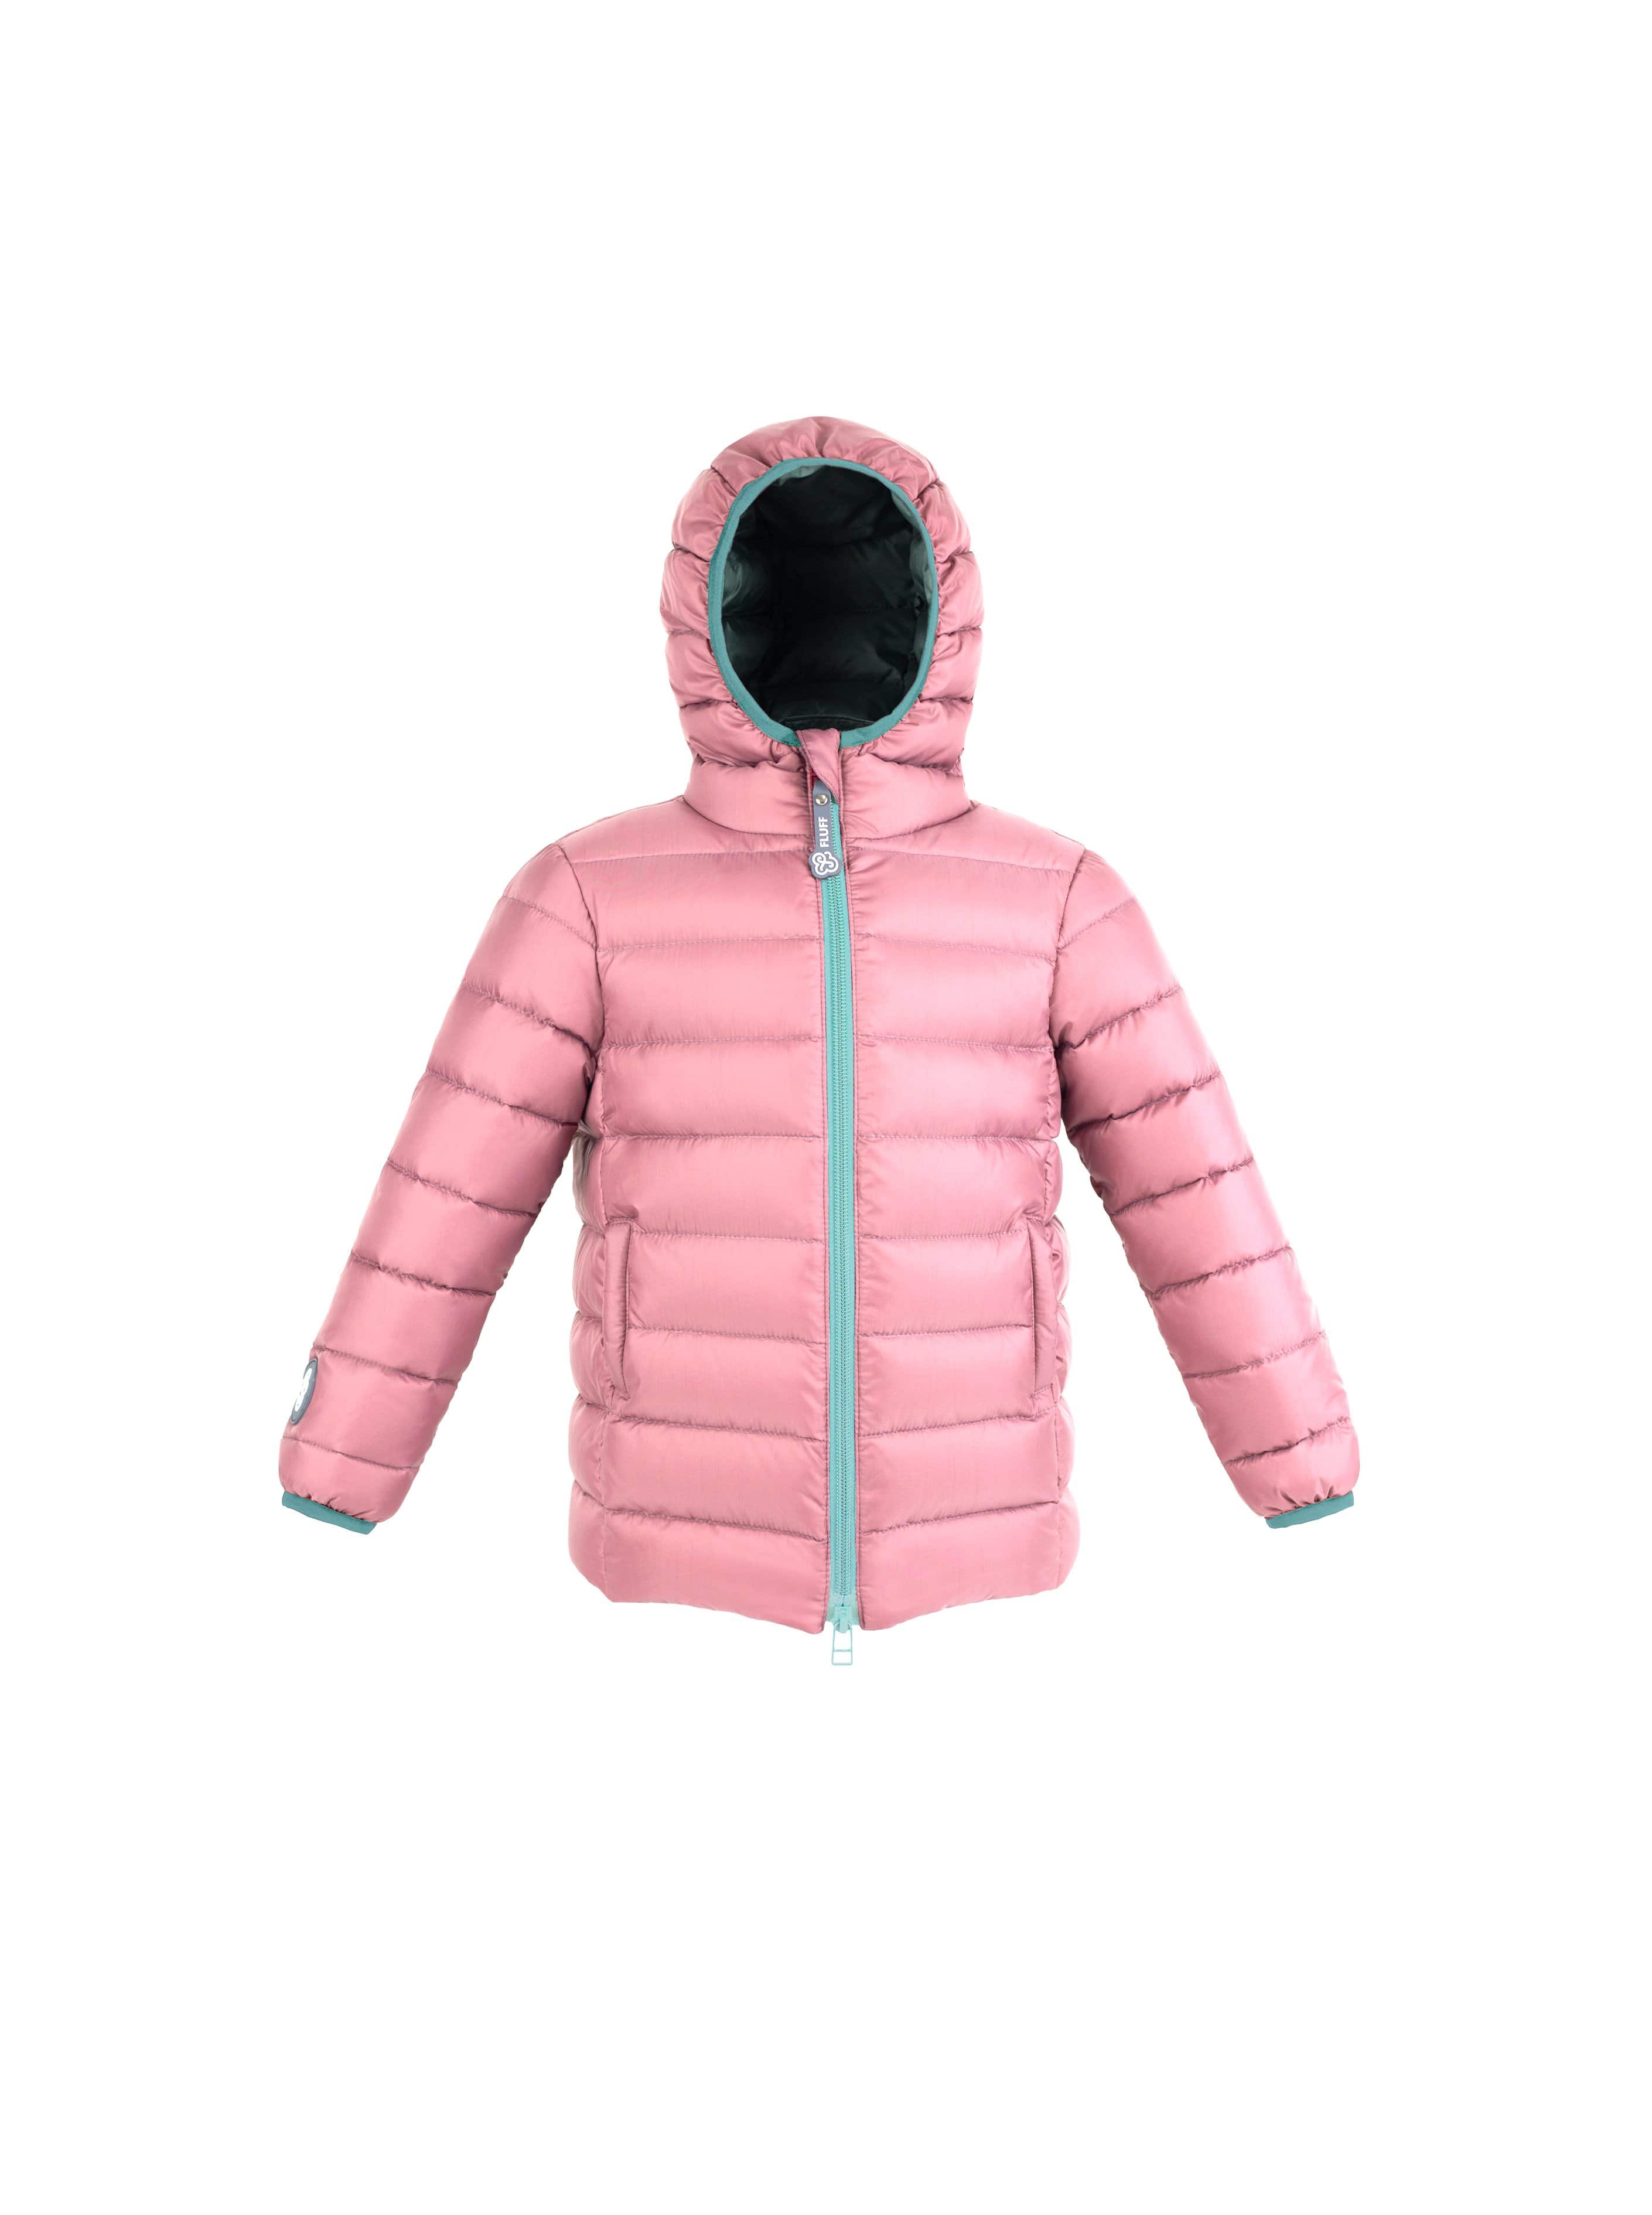 Fluff Down Jacket: Reversible Mint and Nude